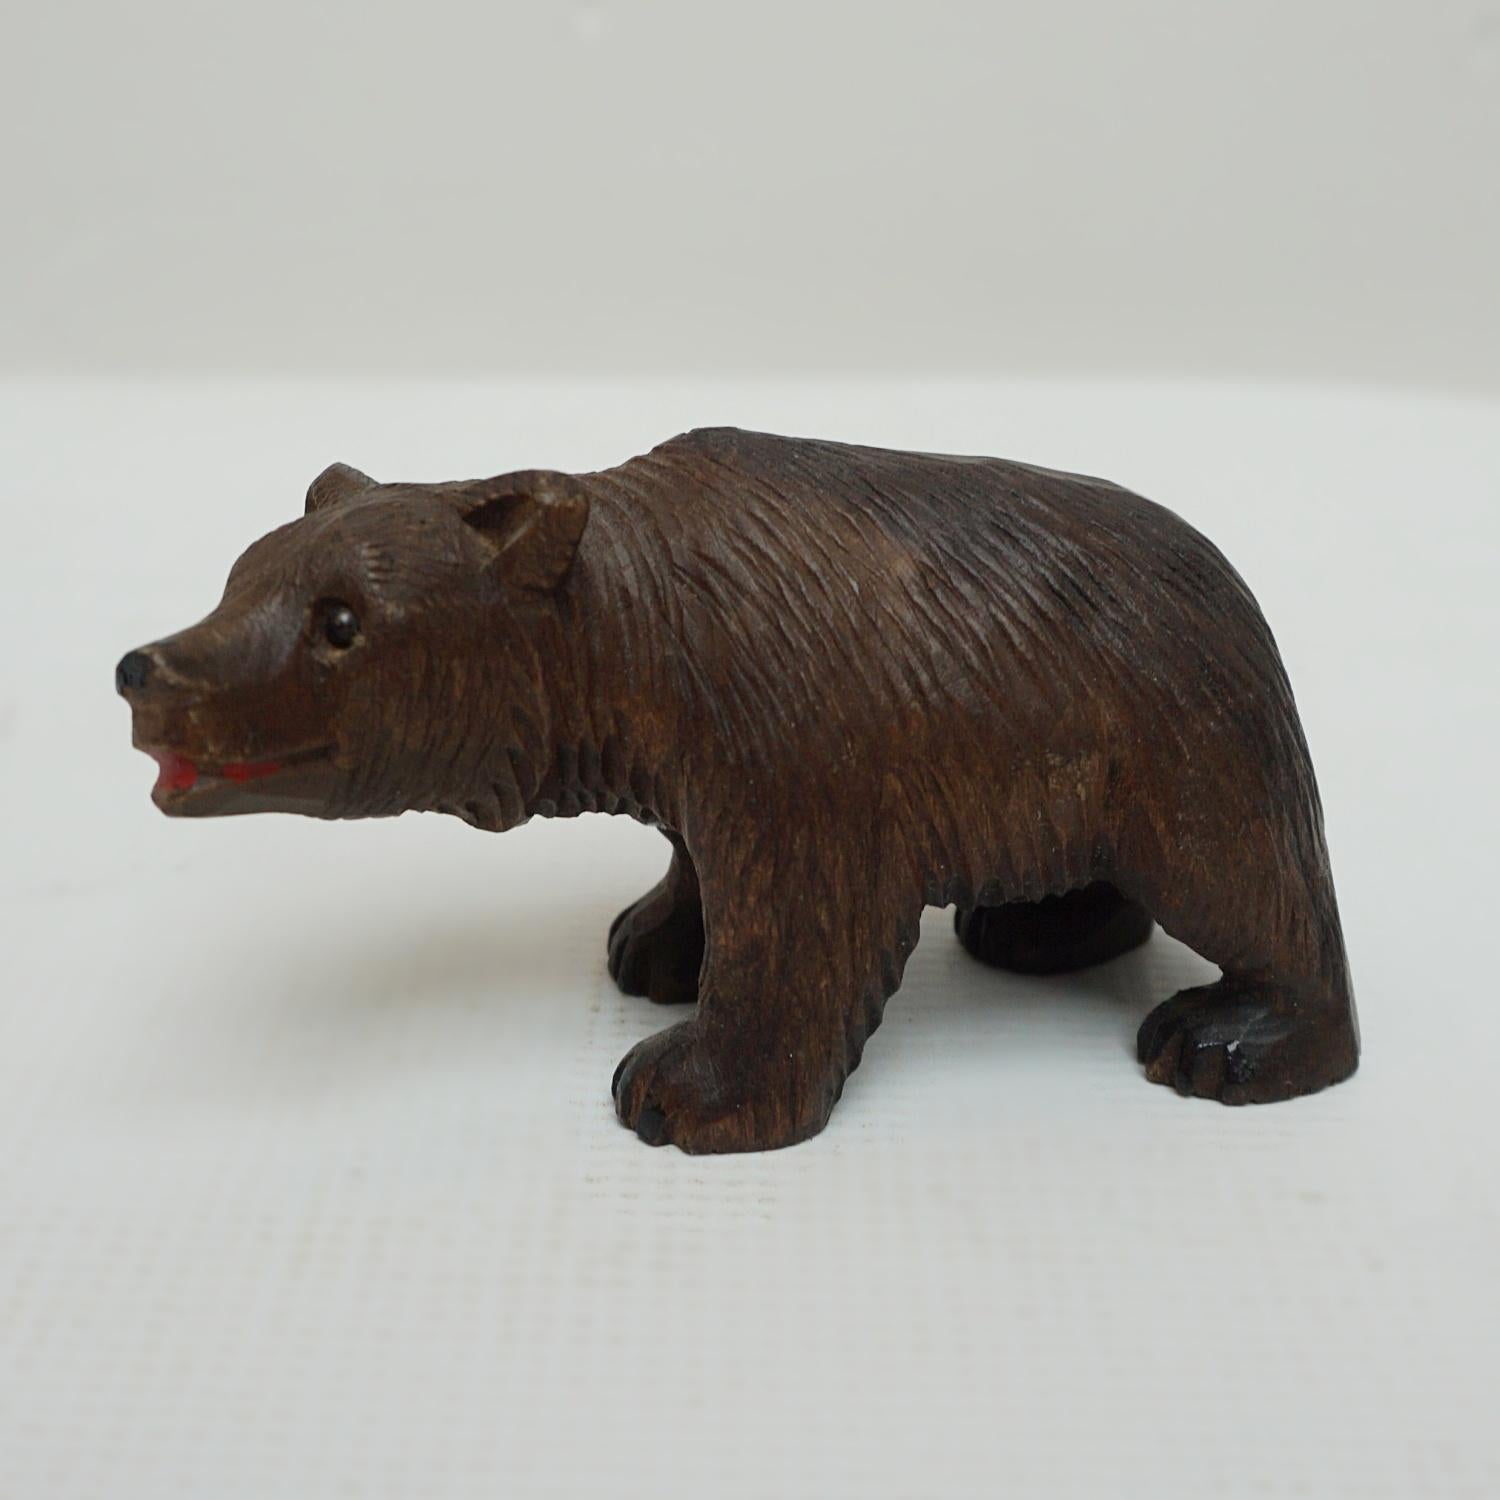 A Black Forest small carved baby bear. fine hand carved detail with original glass eyes. Linden wood.

Origin: Swiss

Date: circa 1900

Item Number: 1605231.